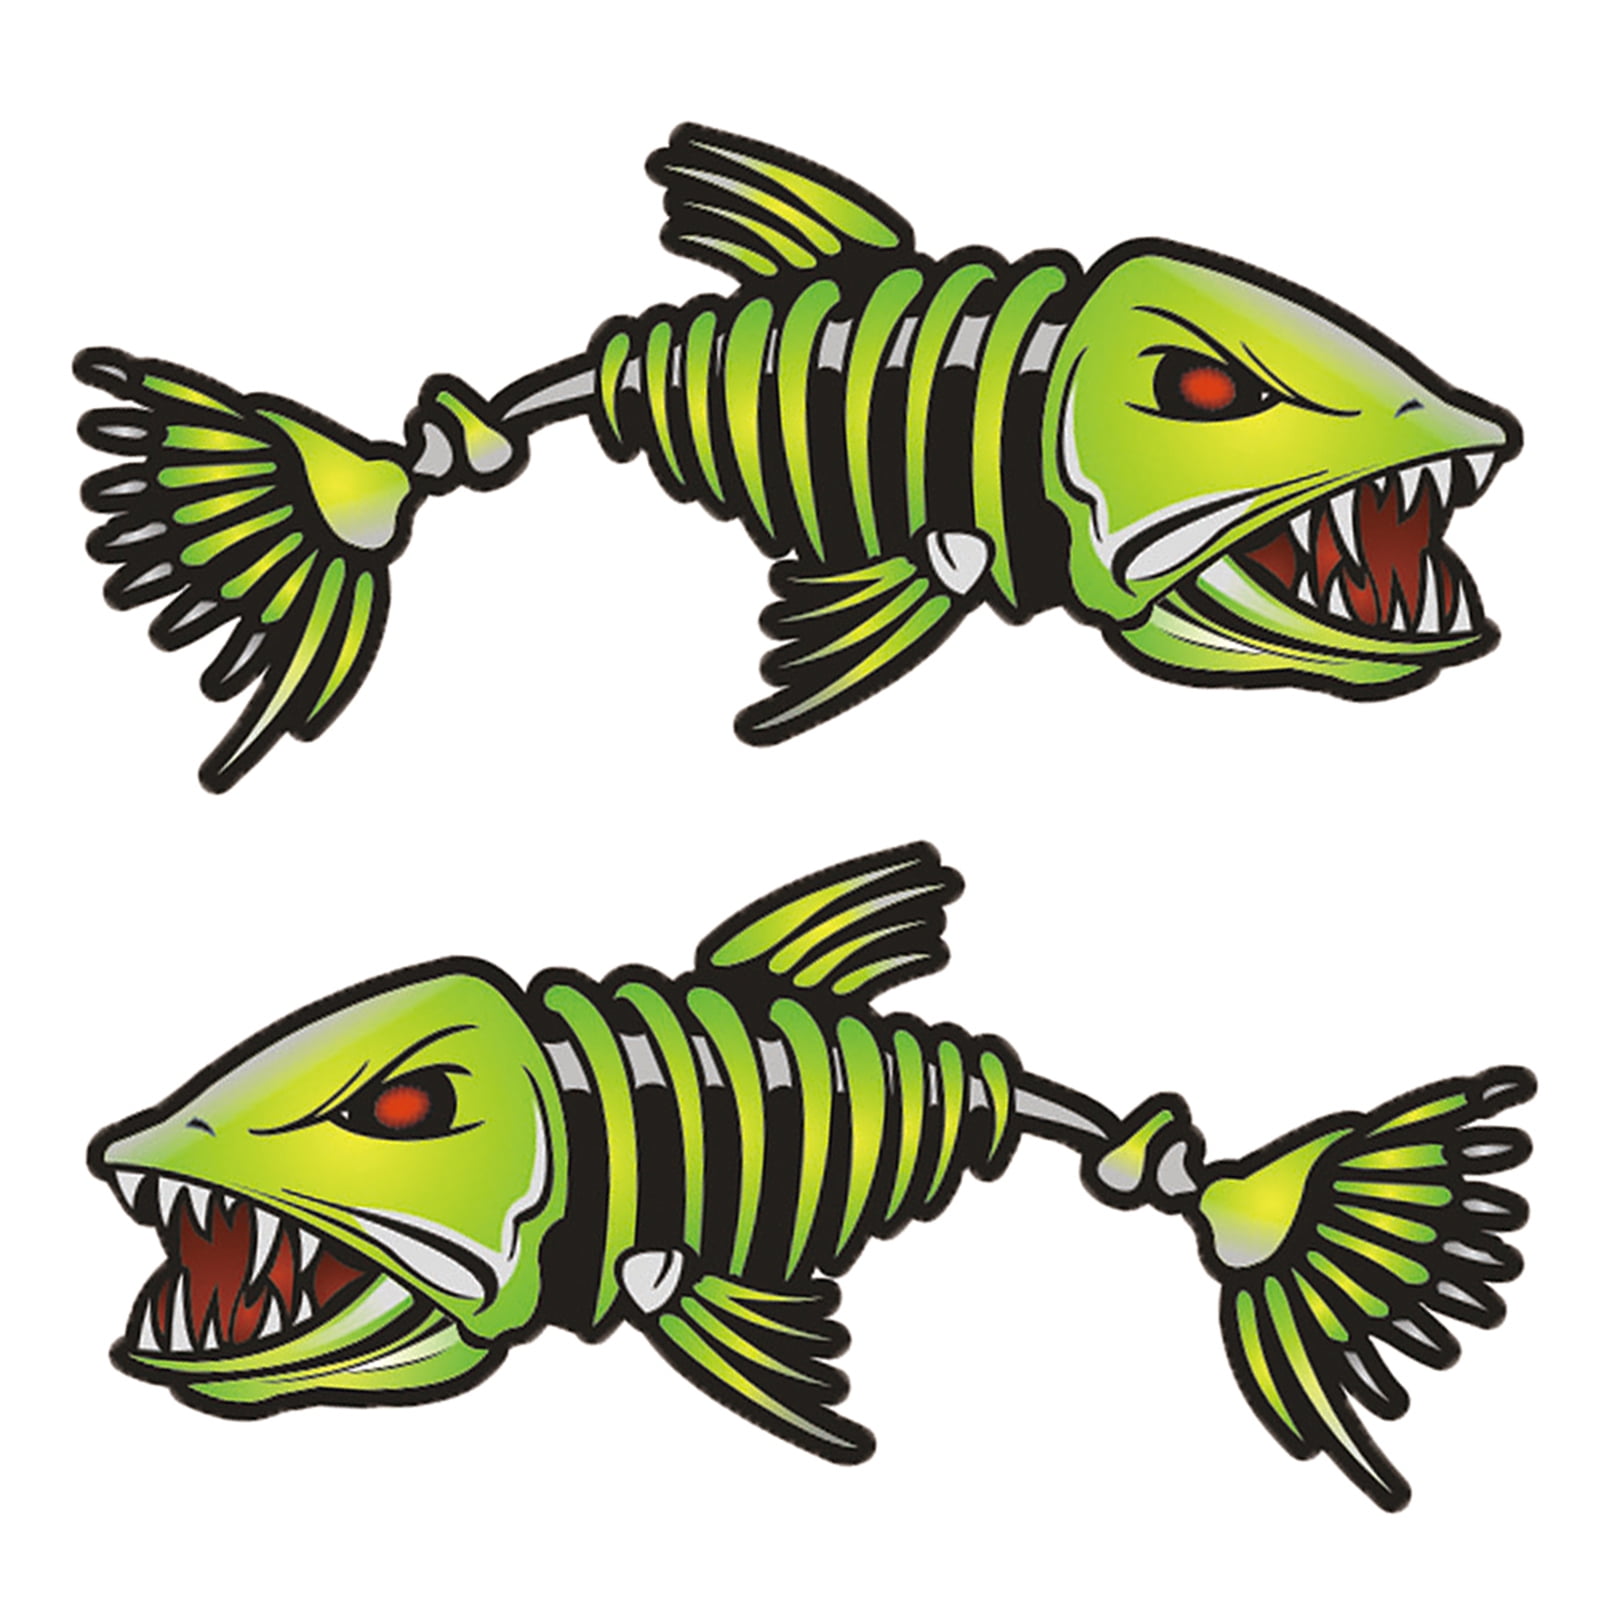 Fishing Funny Cartoon Fish Stickers - 2 Pack of 3 Stickers